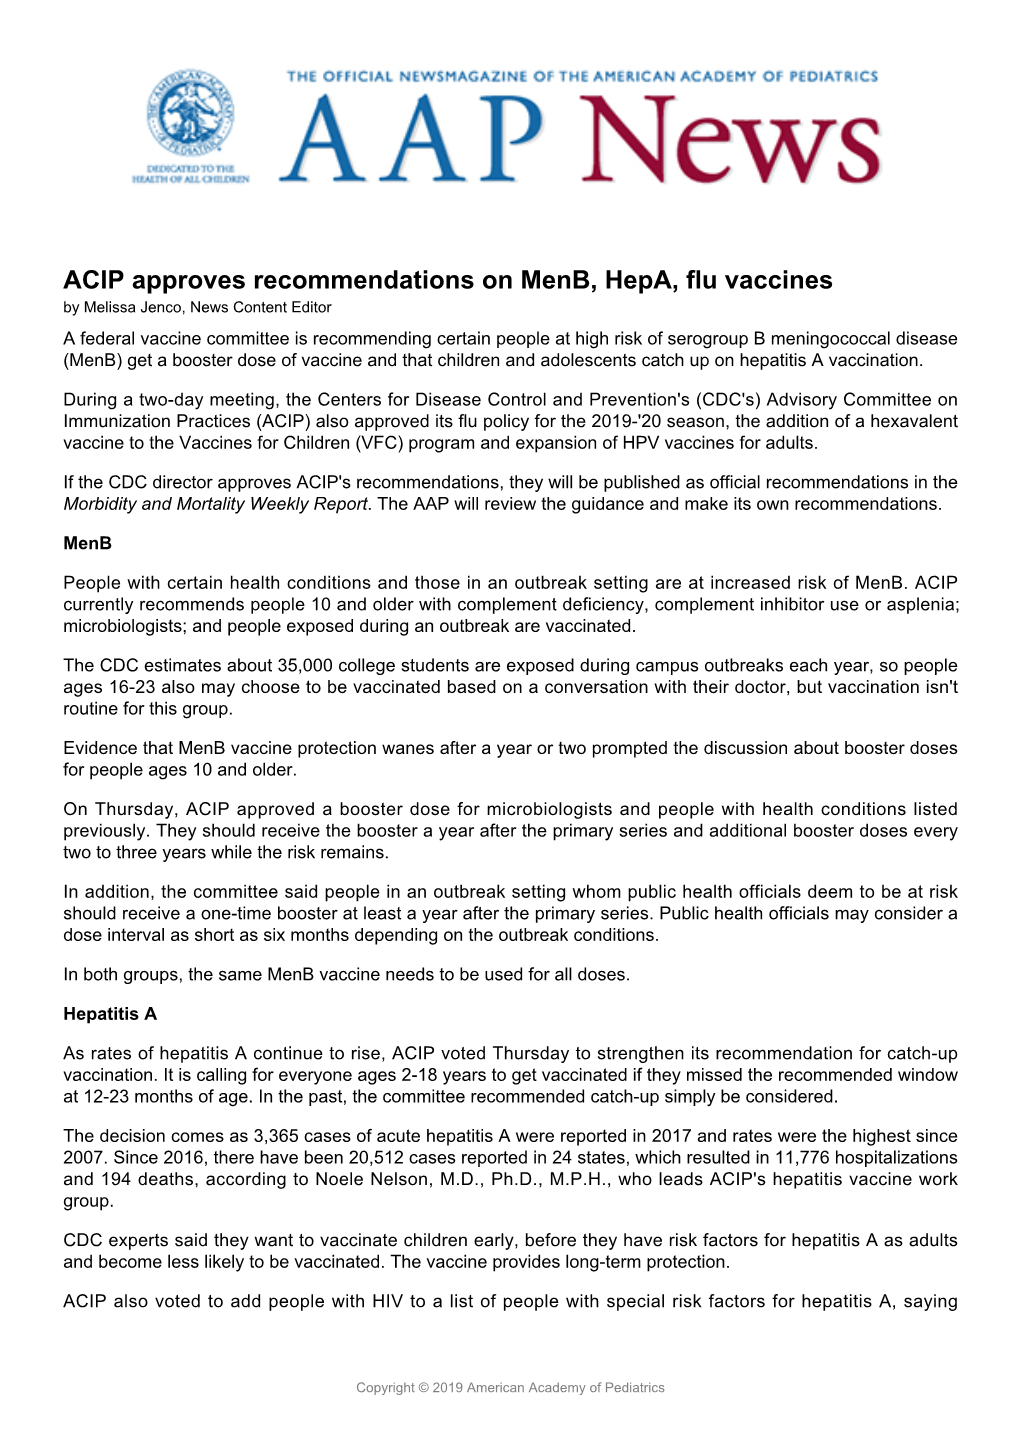 ACIP Approves Recommendations on Menb, Hepa, Flu Vaccines